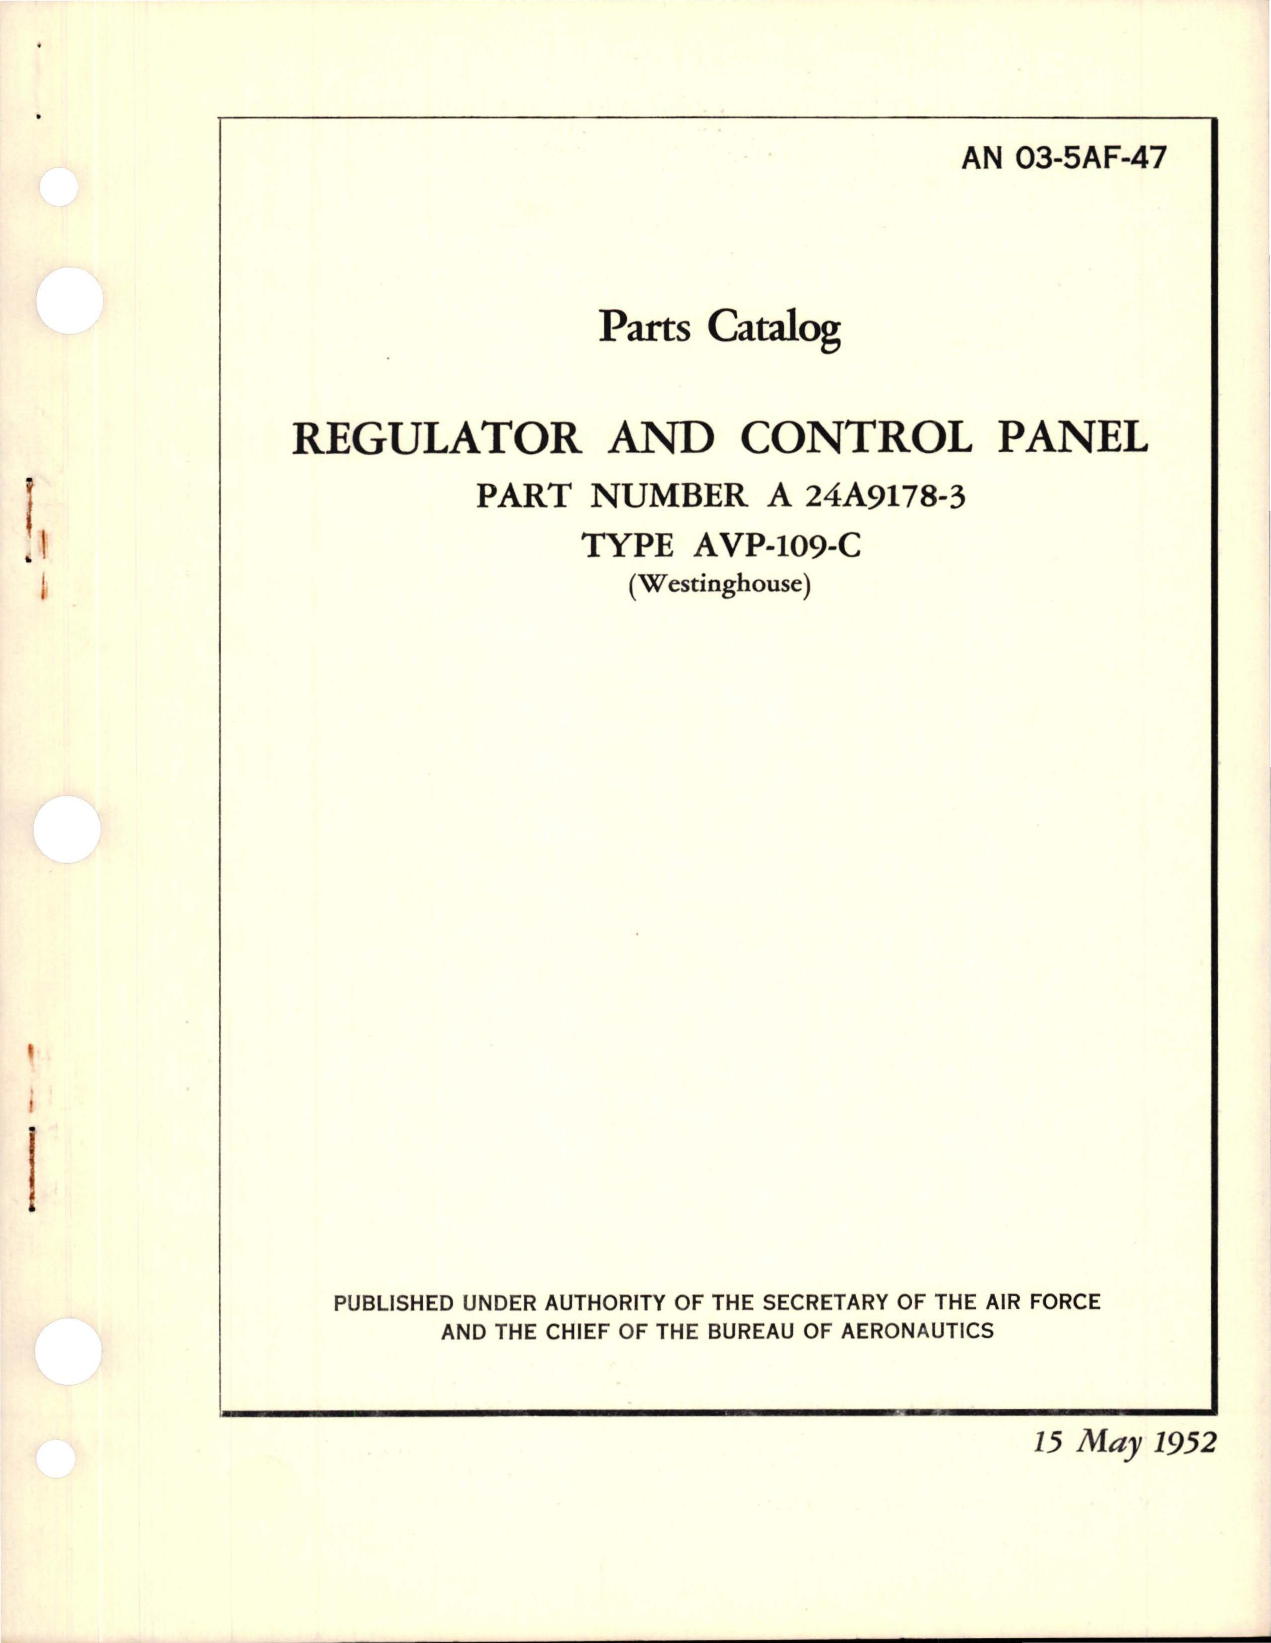 Sample page 1 from AirCorps Library document: Parts Catalog for Regulator and Control Panel - Part A24A9178-3 - Type AVP-109-C